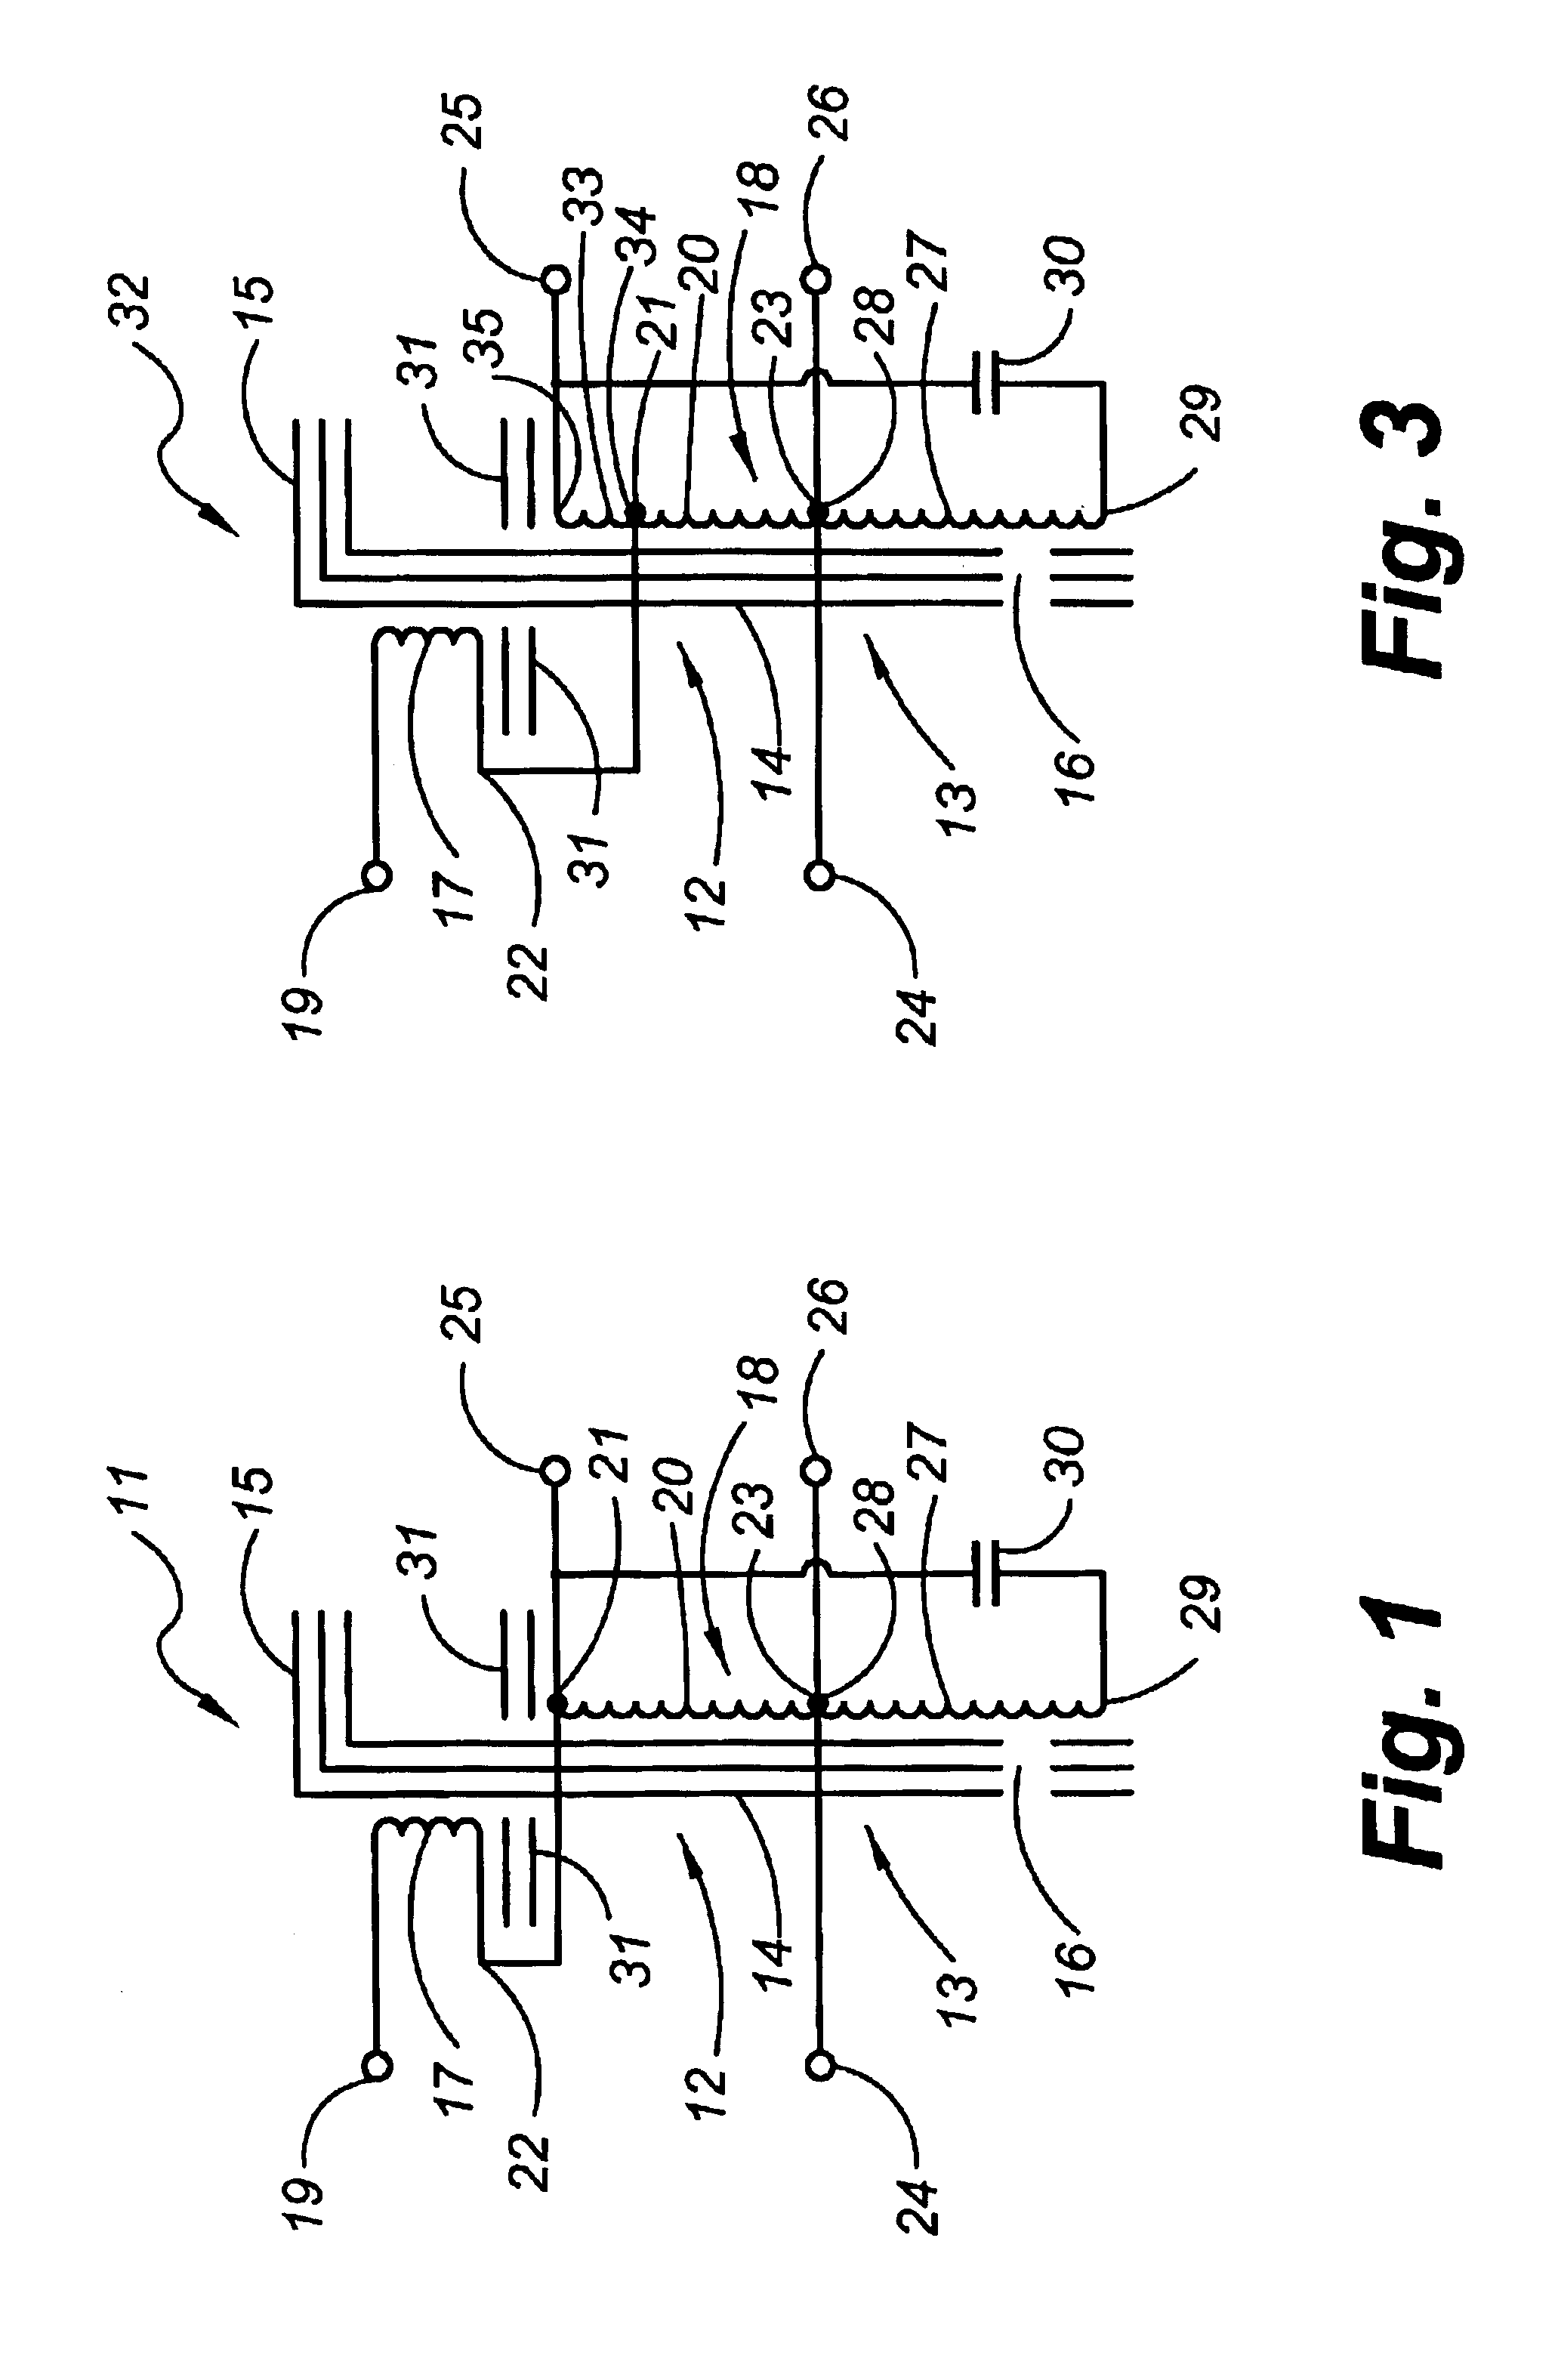 Harmonic filtering circuit with special transformer